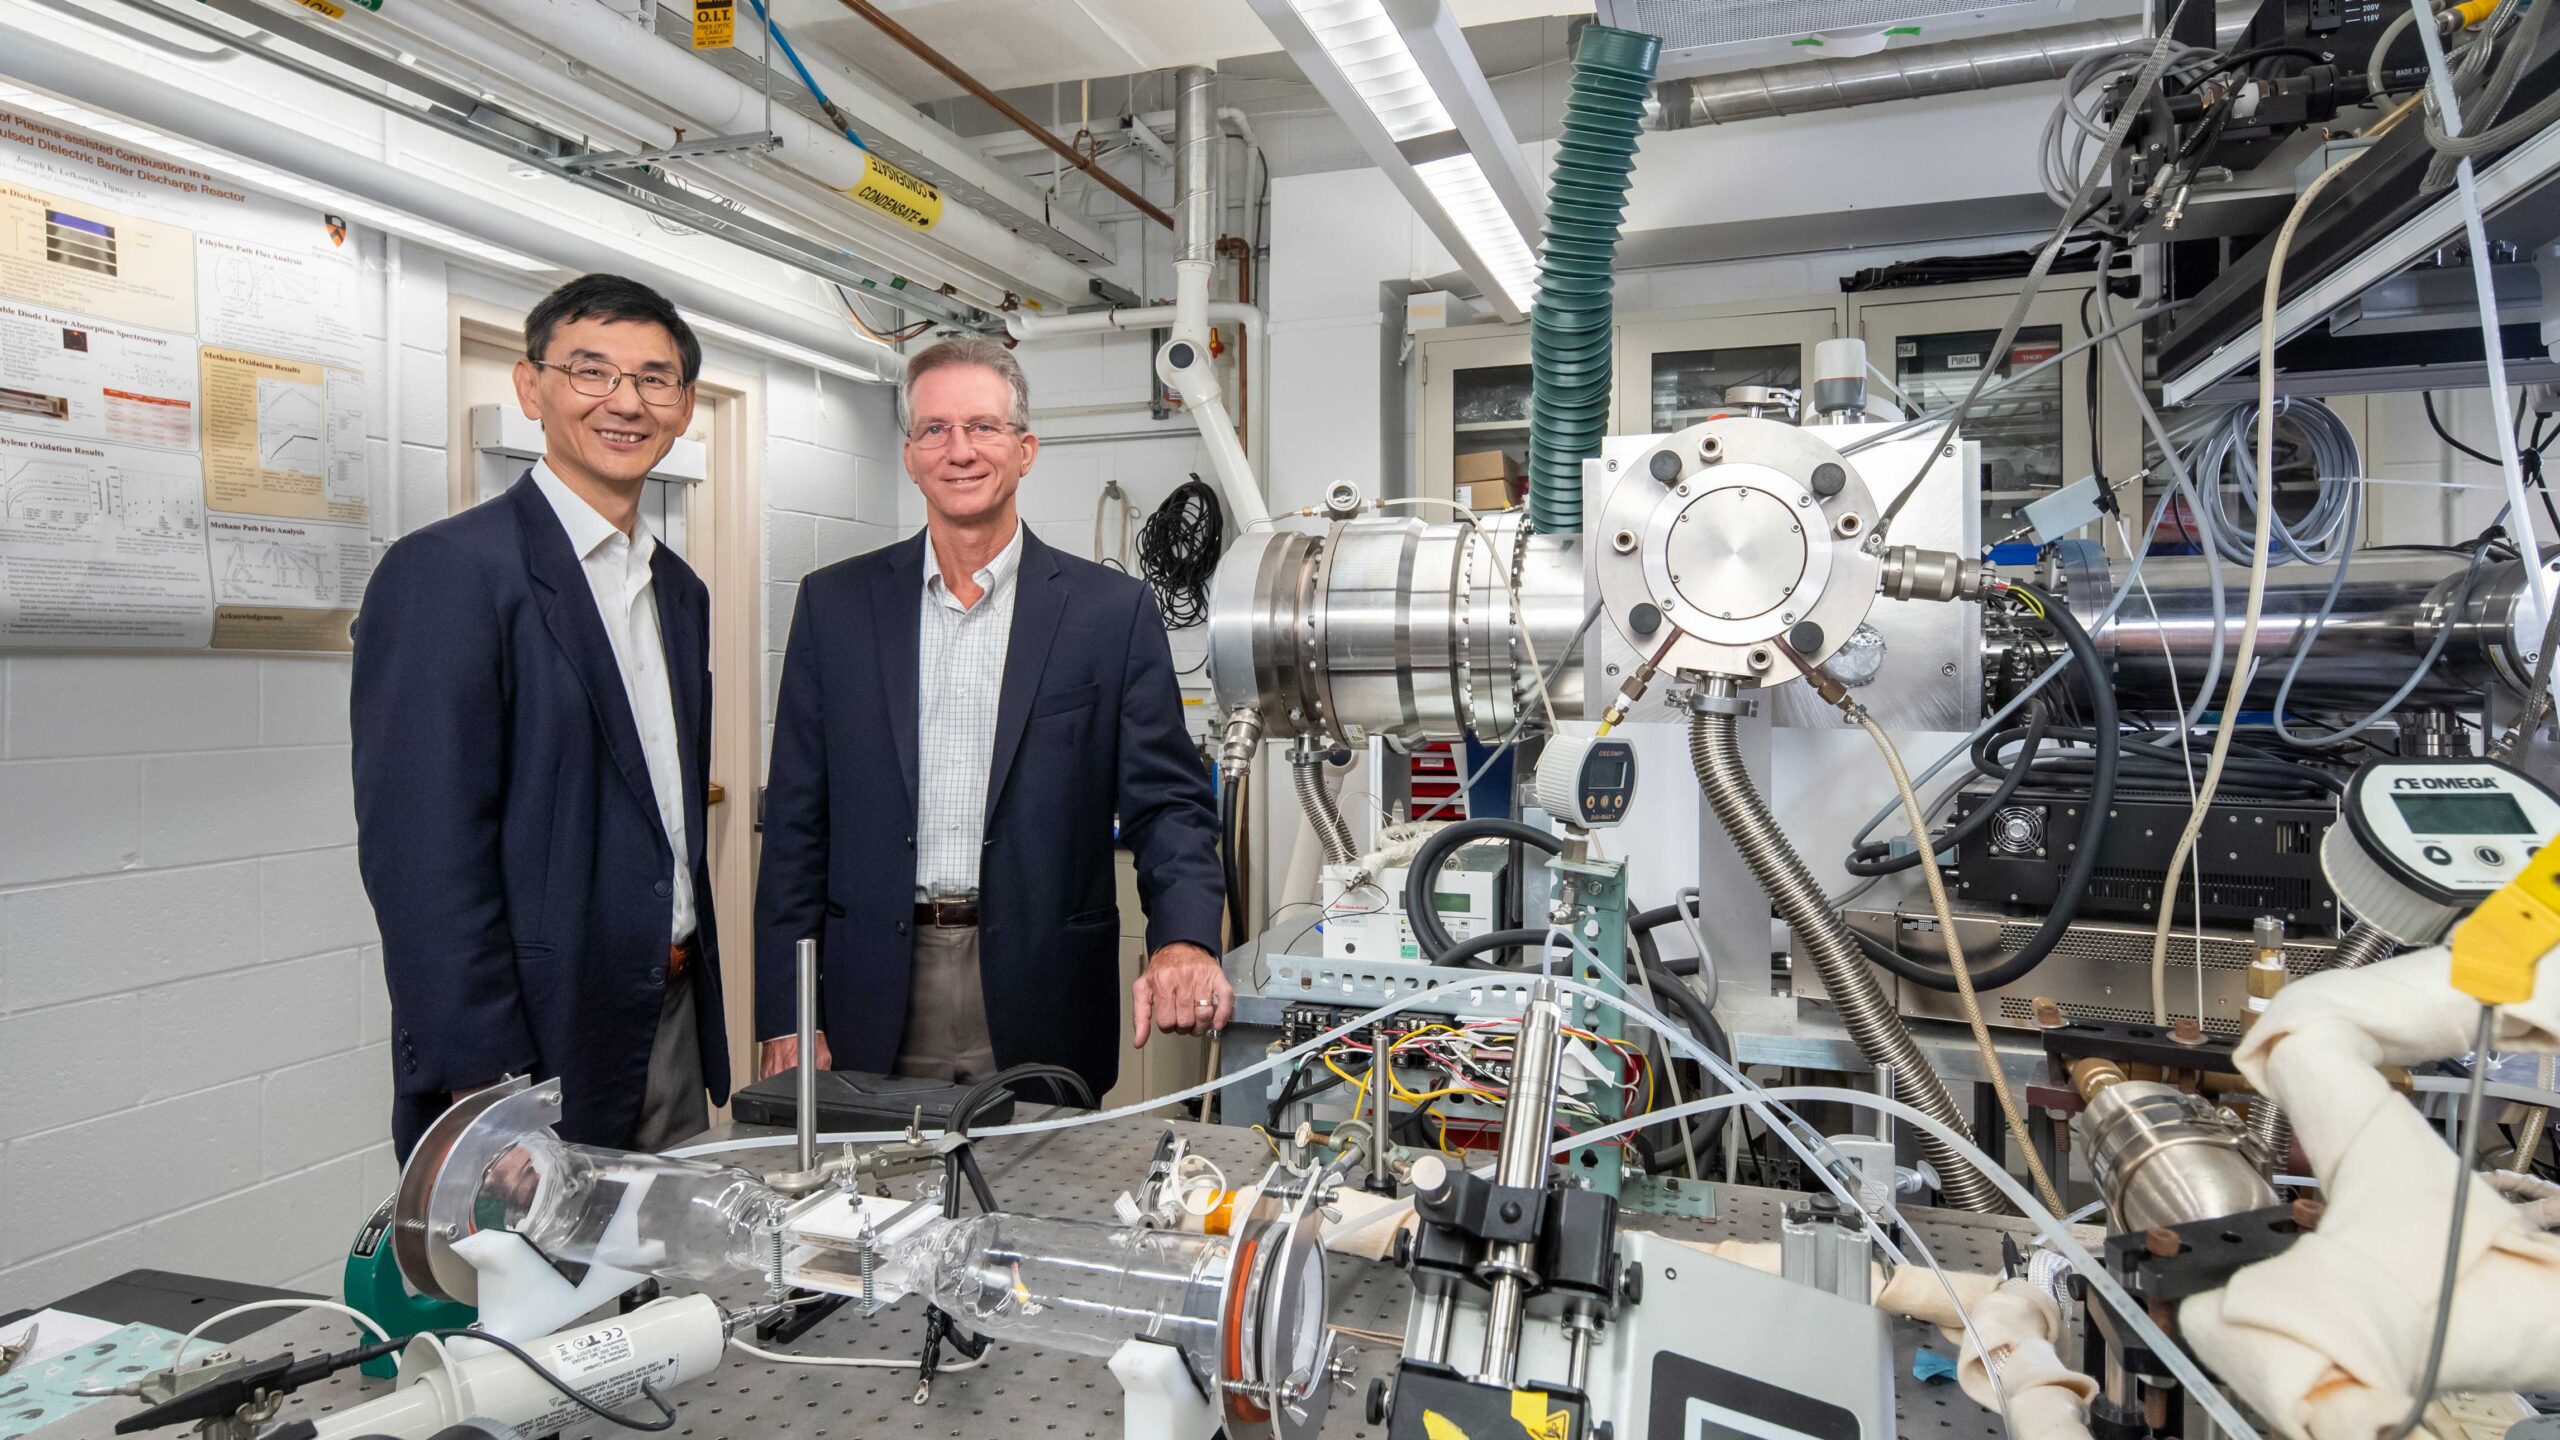 Two researchers in laboratory with molecular beam equipment